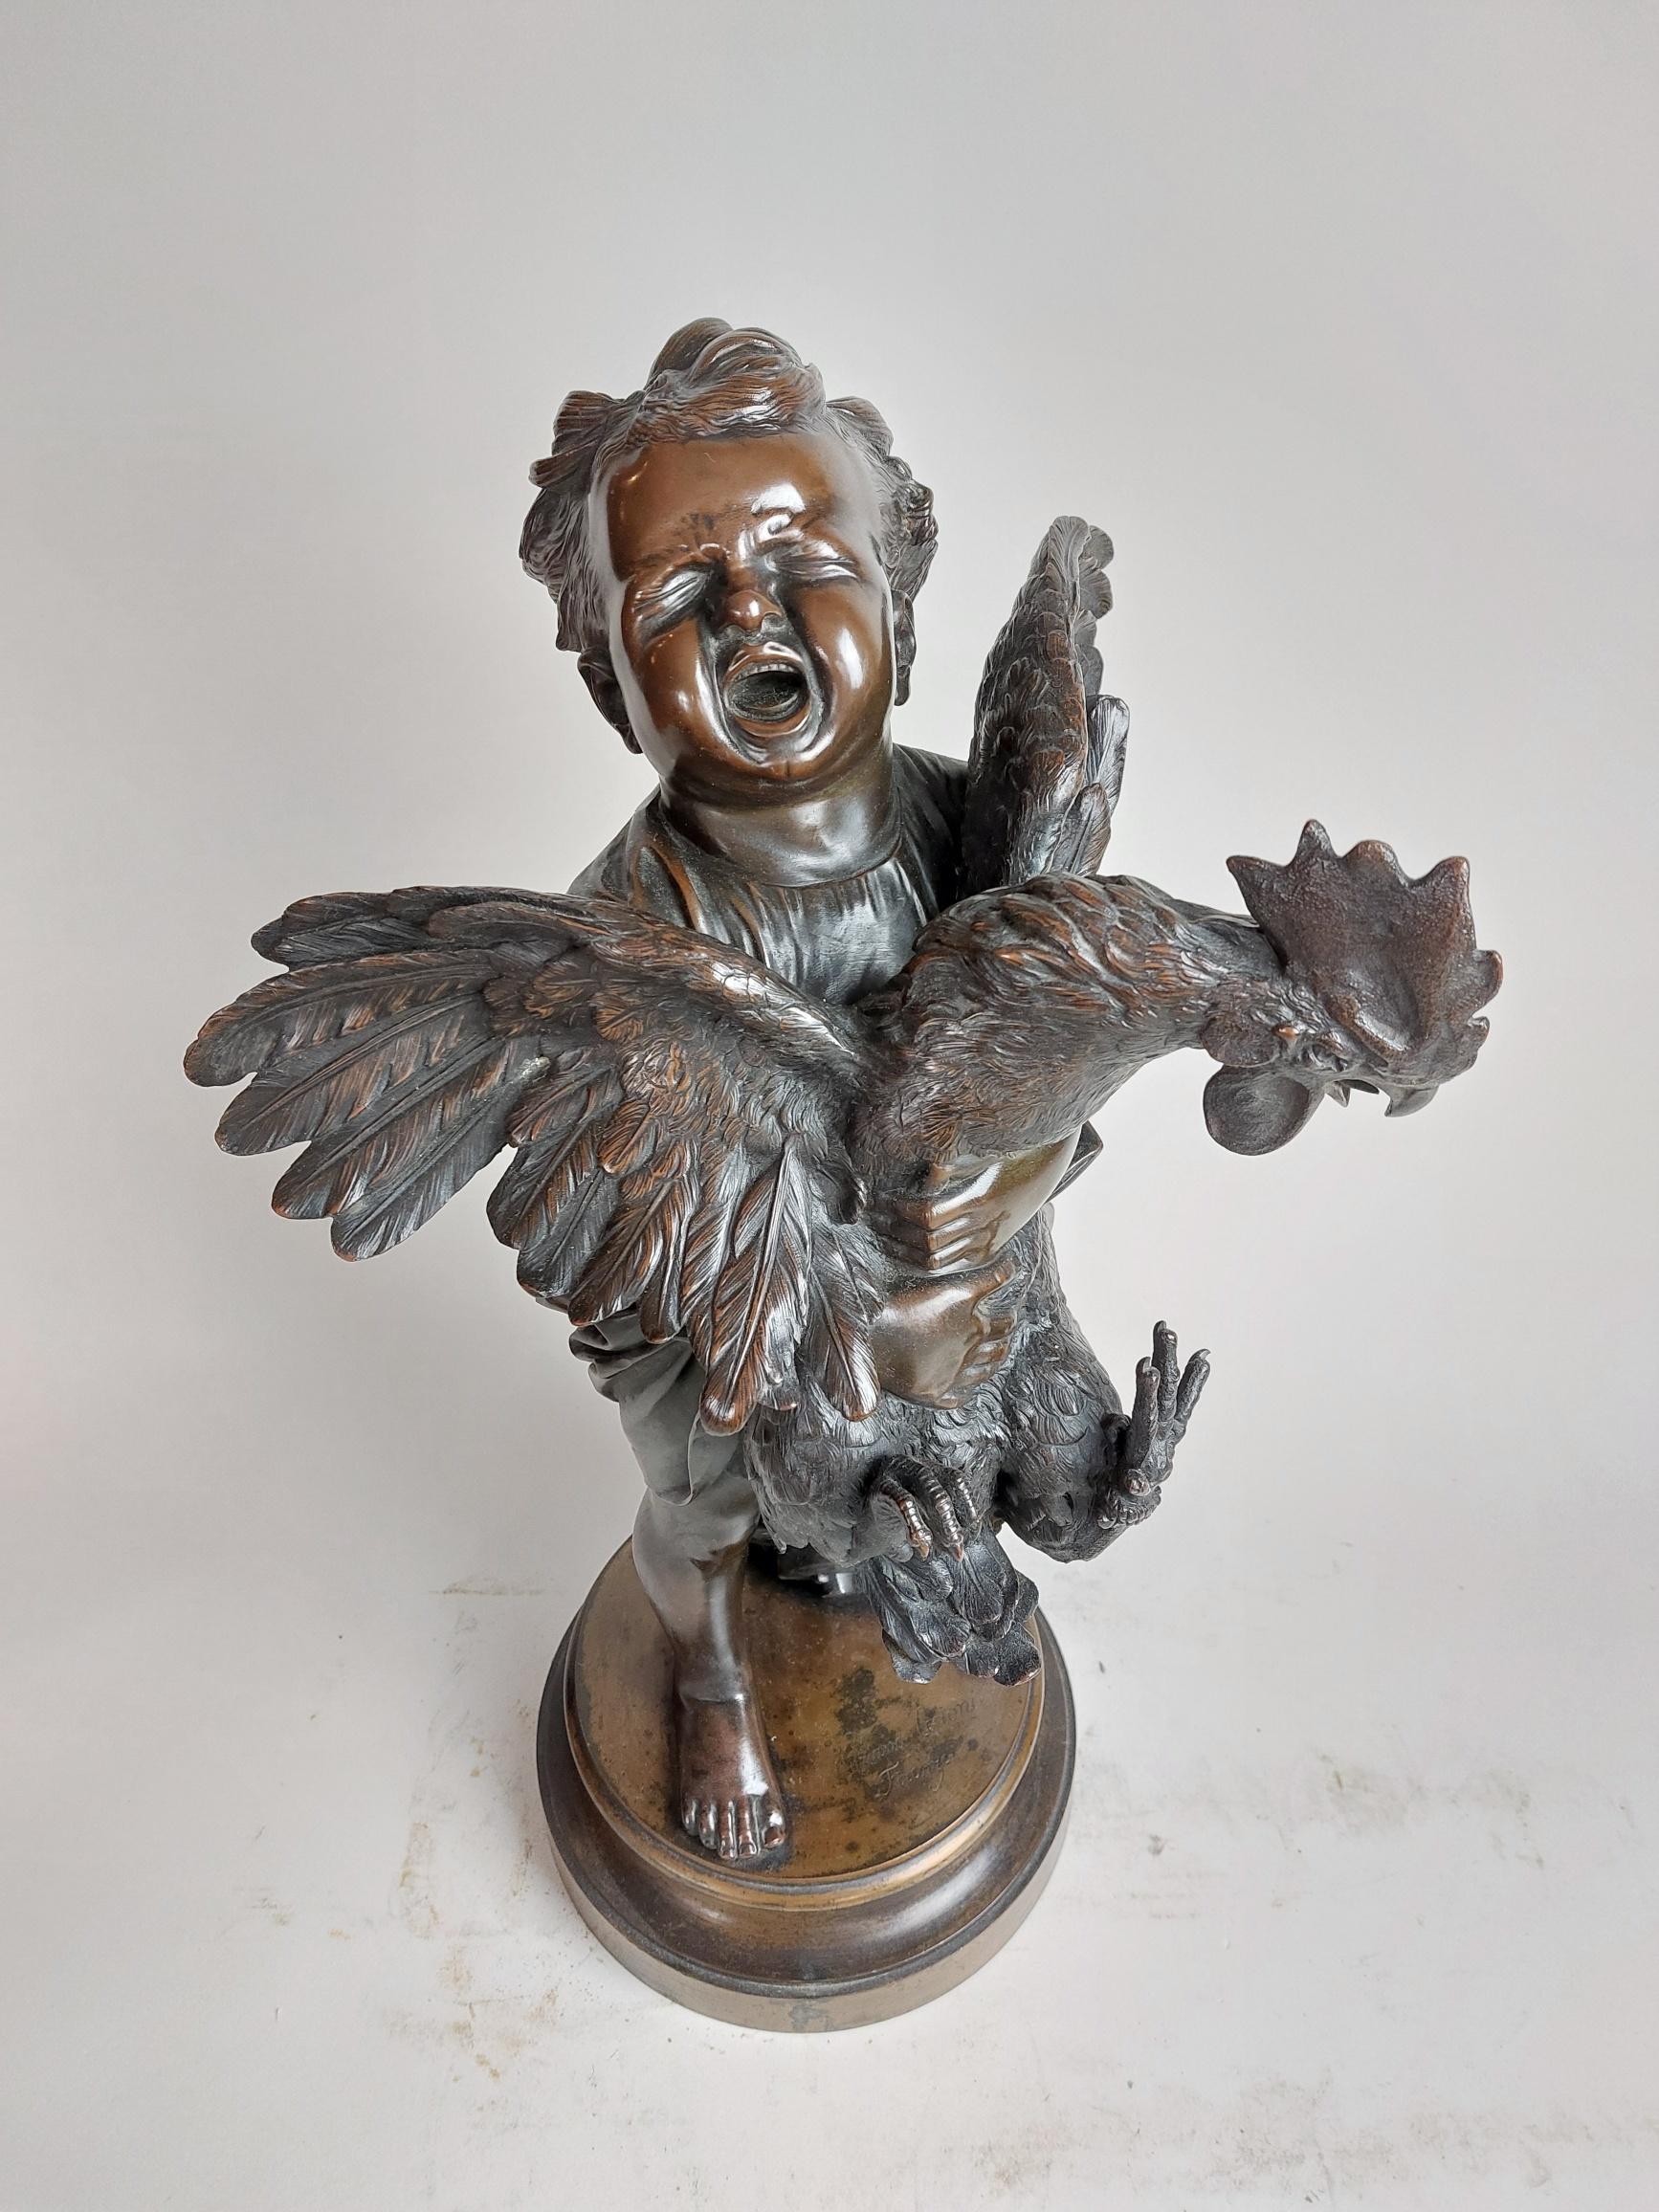 An amusing 19th century Italian bronze of a screaming baby holding a cockerel. 

For some reason the toddler has decided it would be a good idea to pick up a cockerel. The cockerel is not happy about this and is clearly flapping and struggling